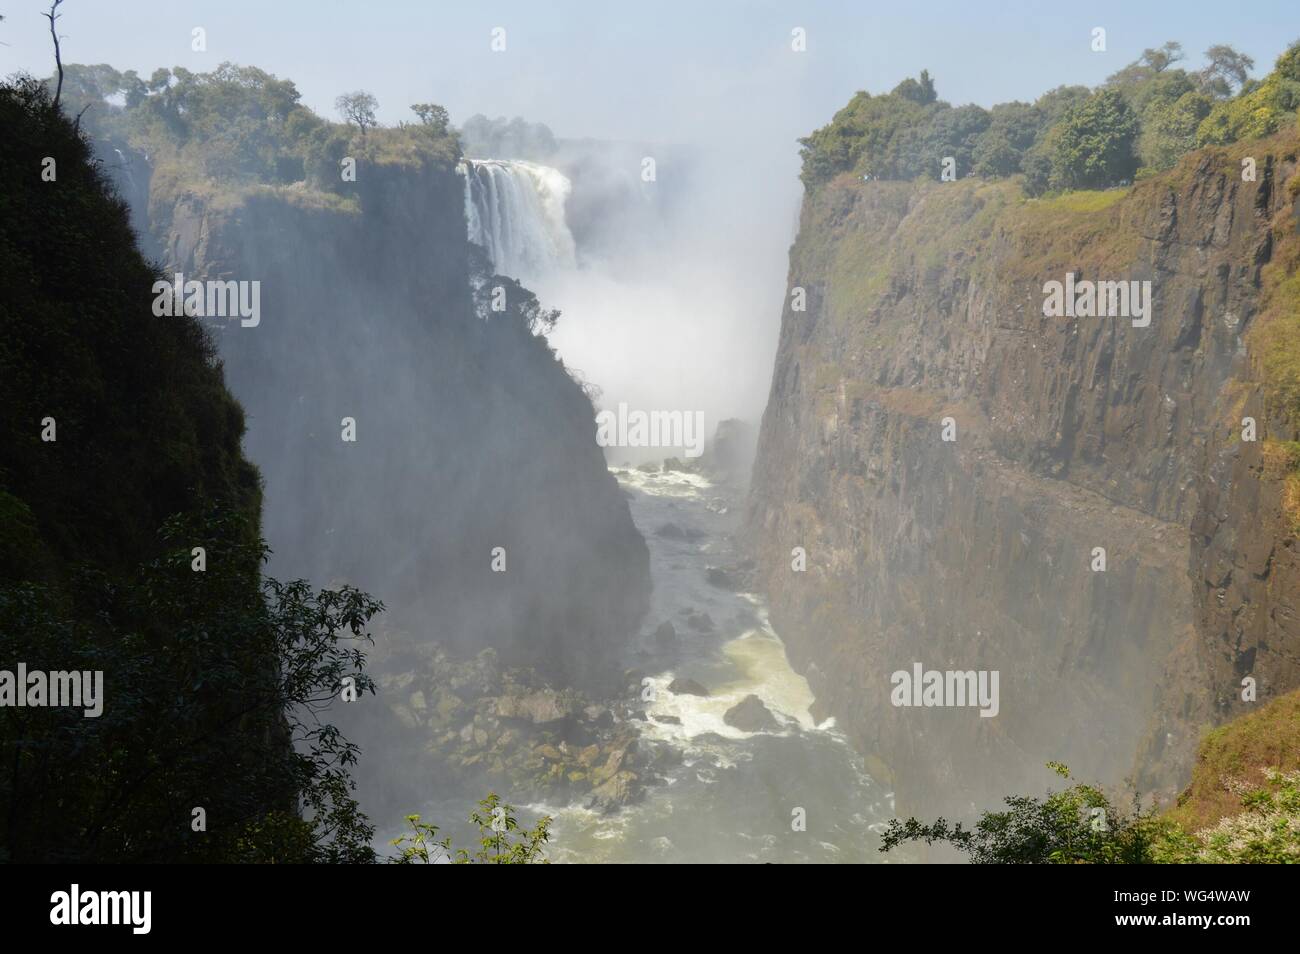 Scenic View Of Victoria Falls Amidst Mountain Valley Stock Photo